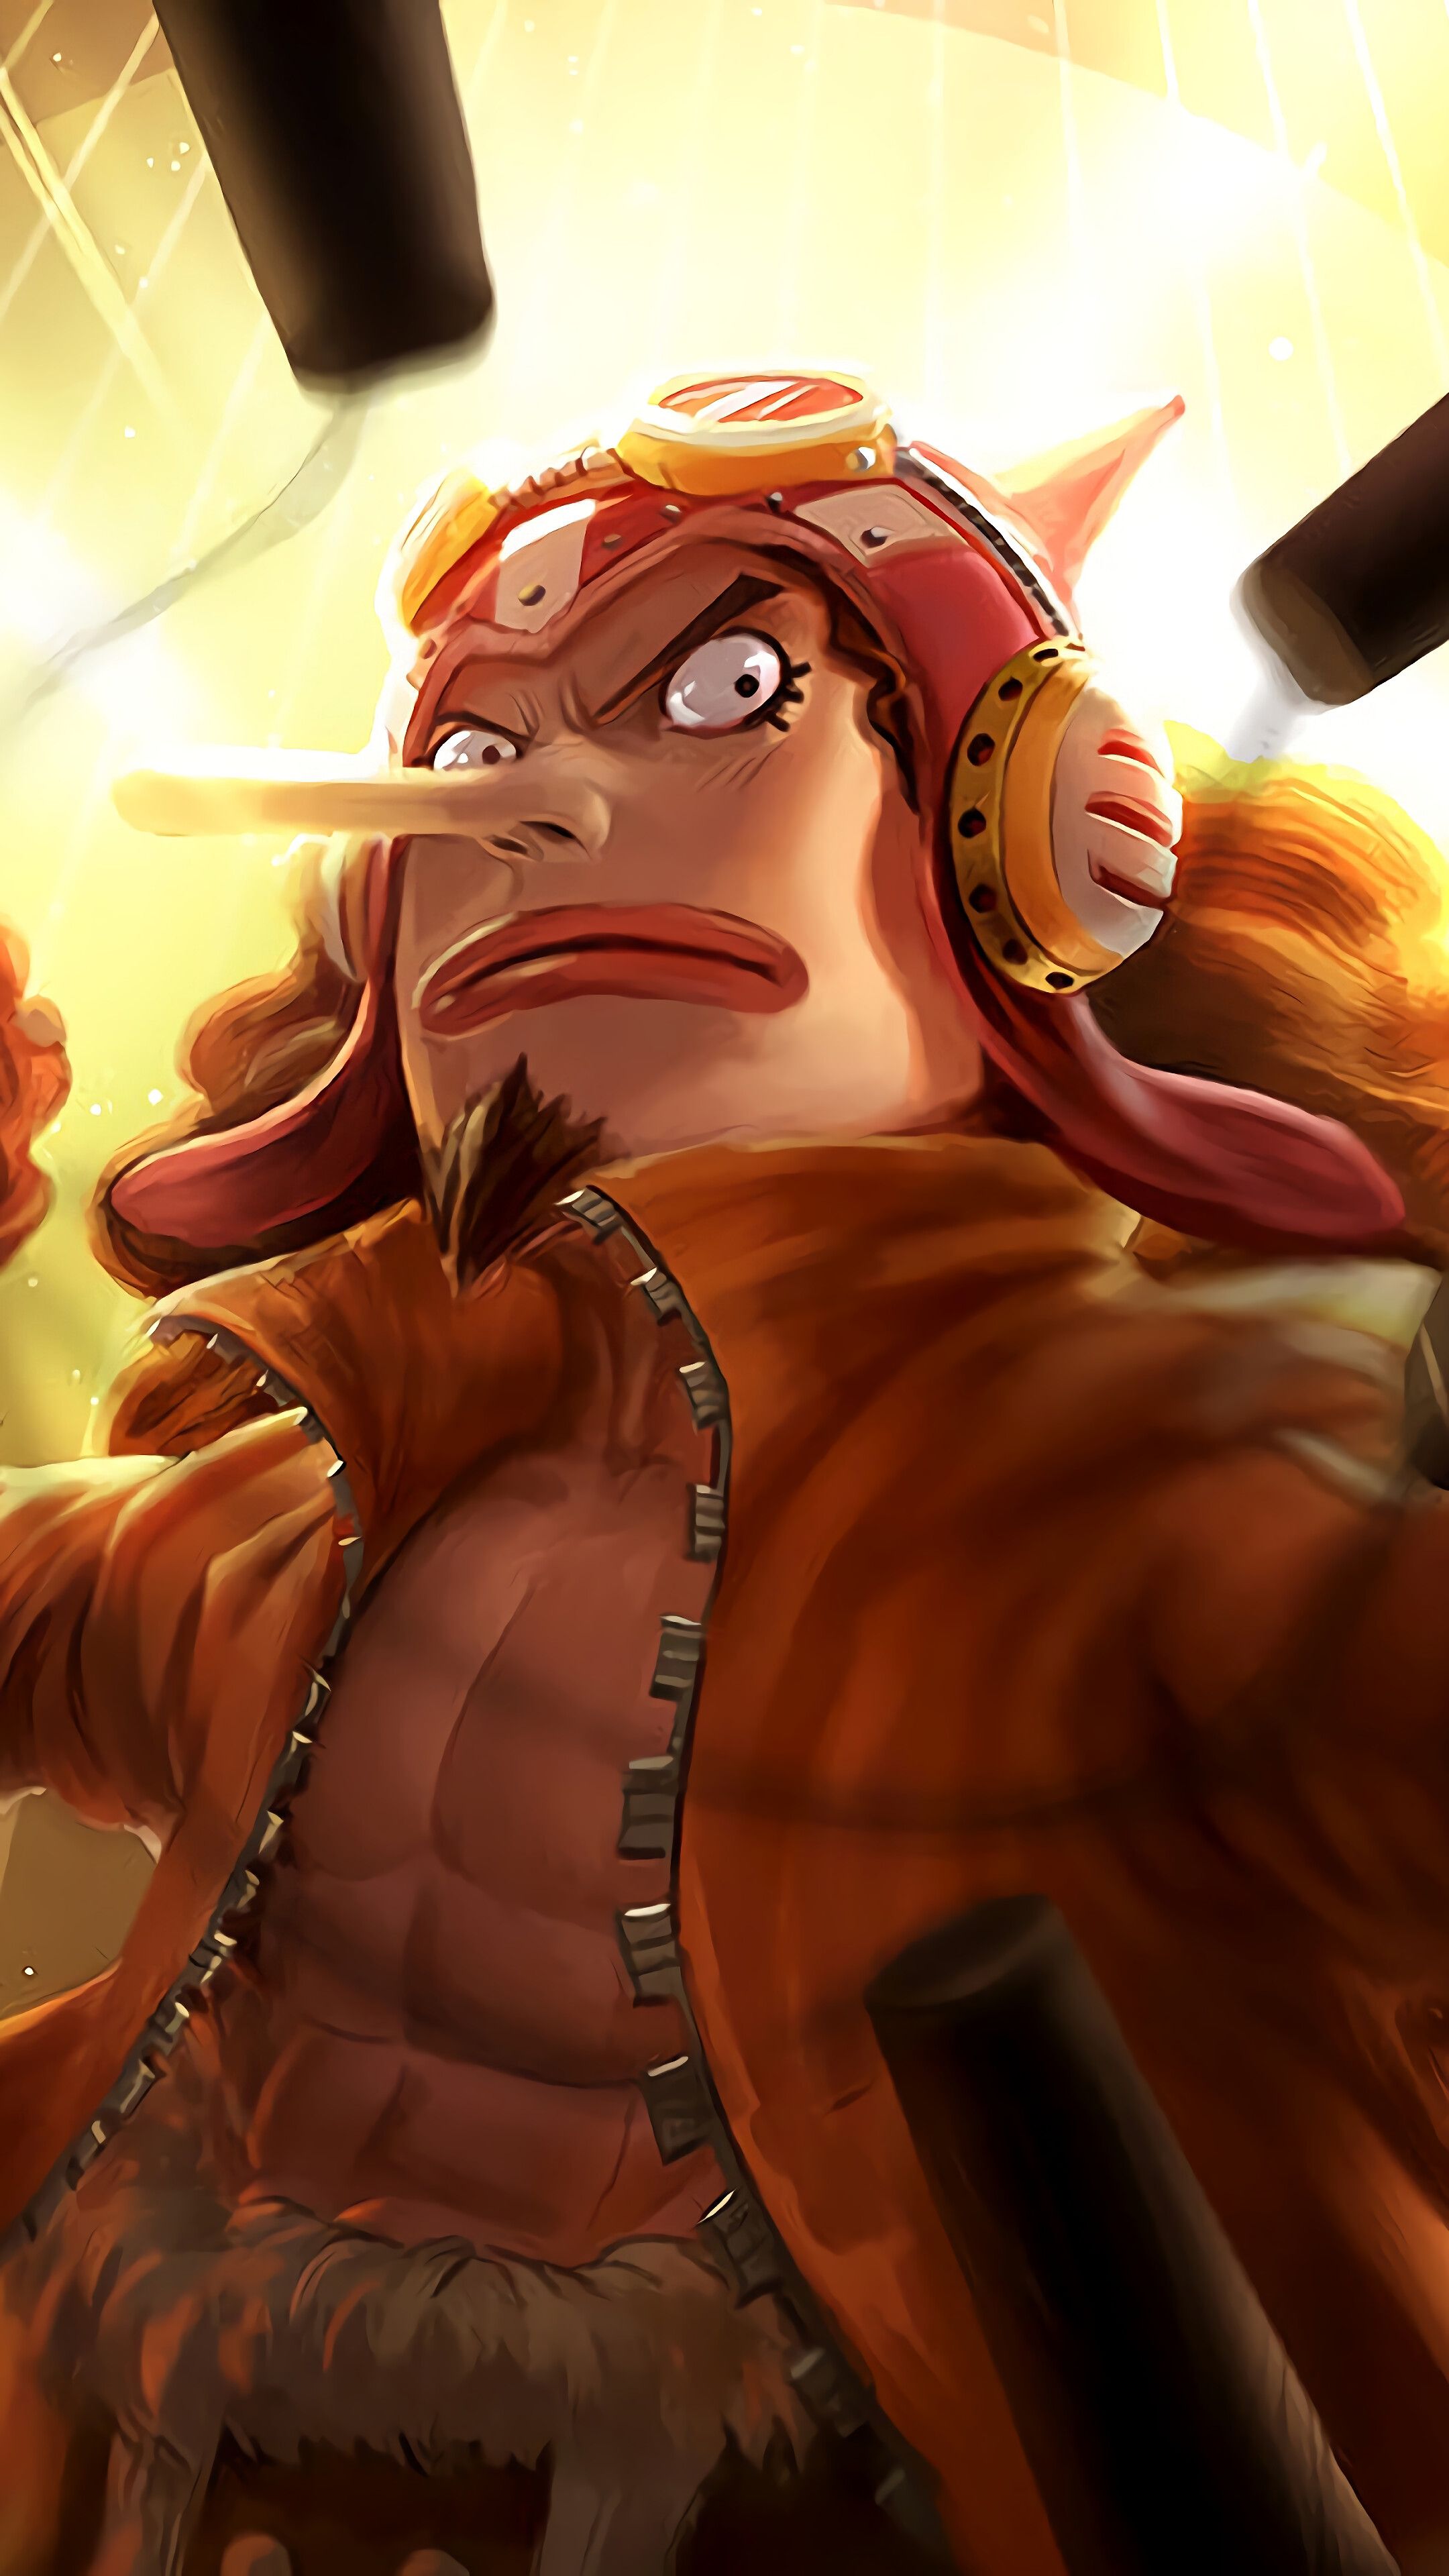 323525 Usopp, One Piece, 4K phone HD Wallpapers, Image, Backgrounds, Photos...